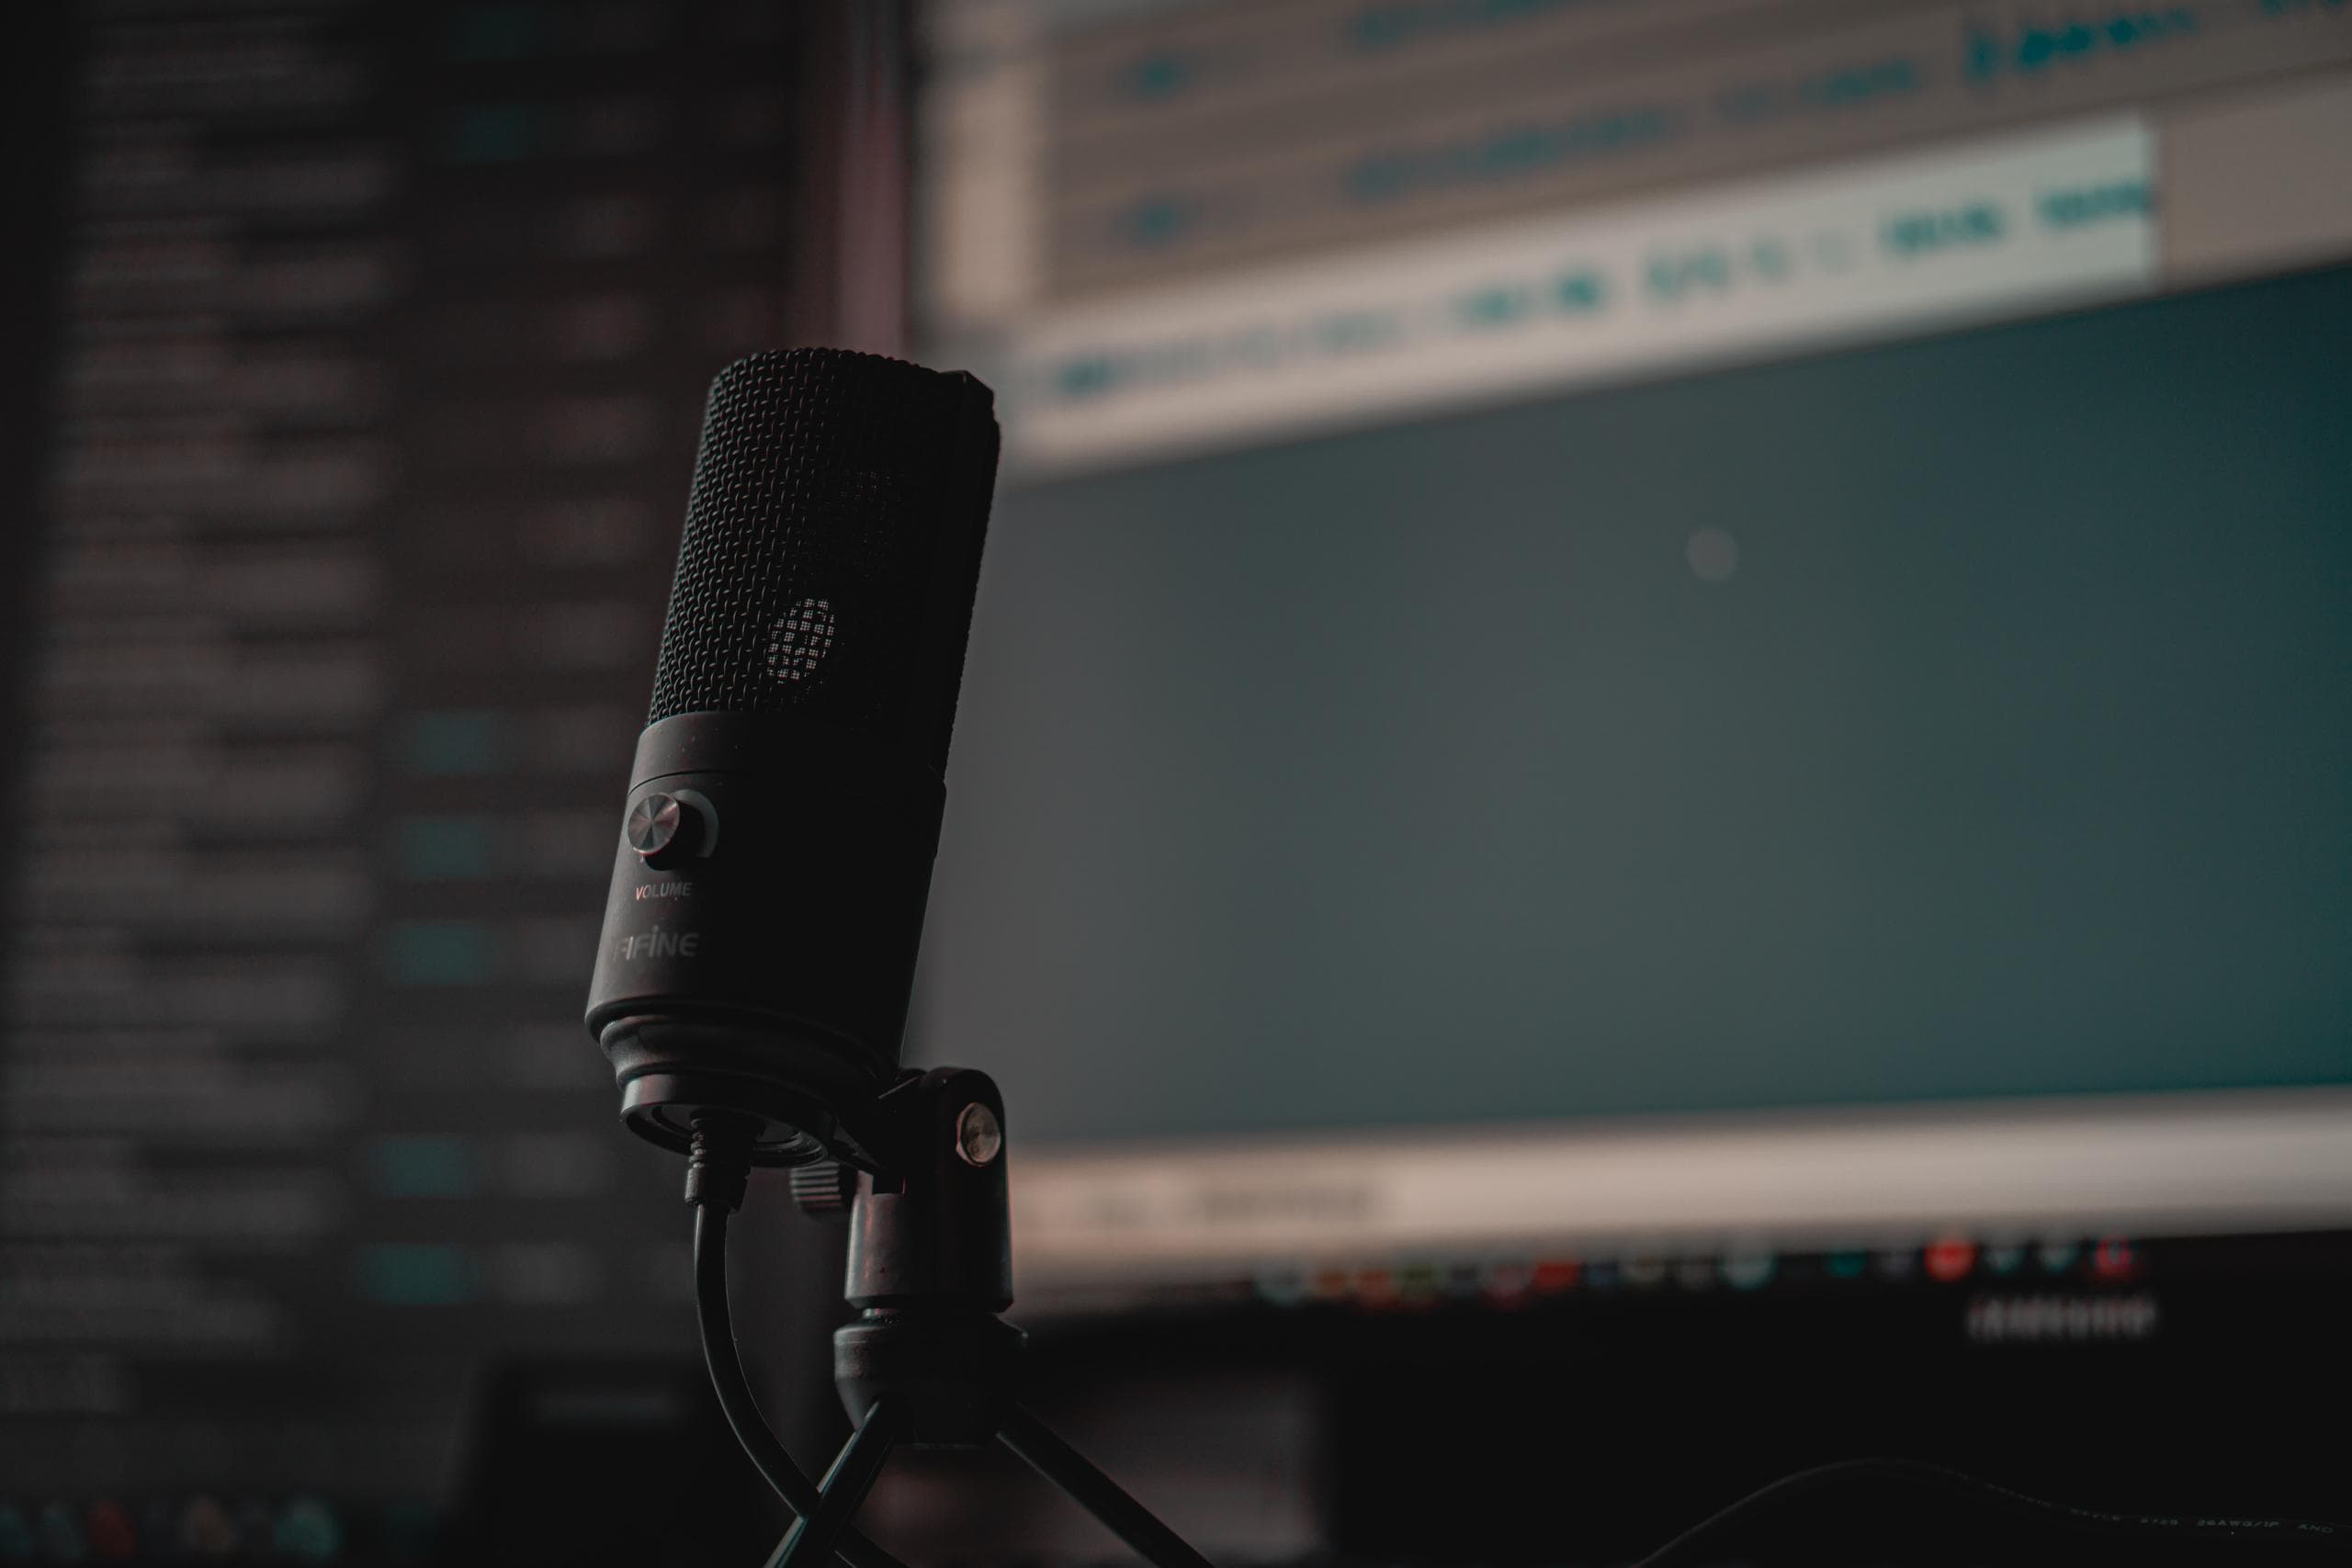 Black podcasting microphone with monitor in the background showing Audacity